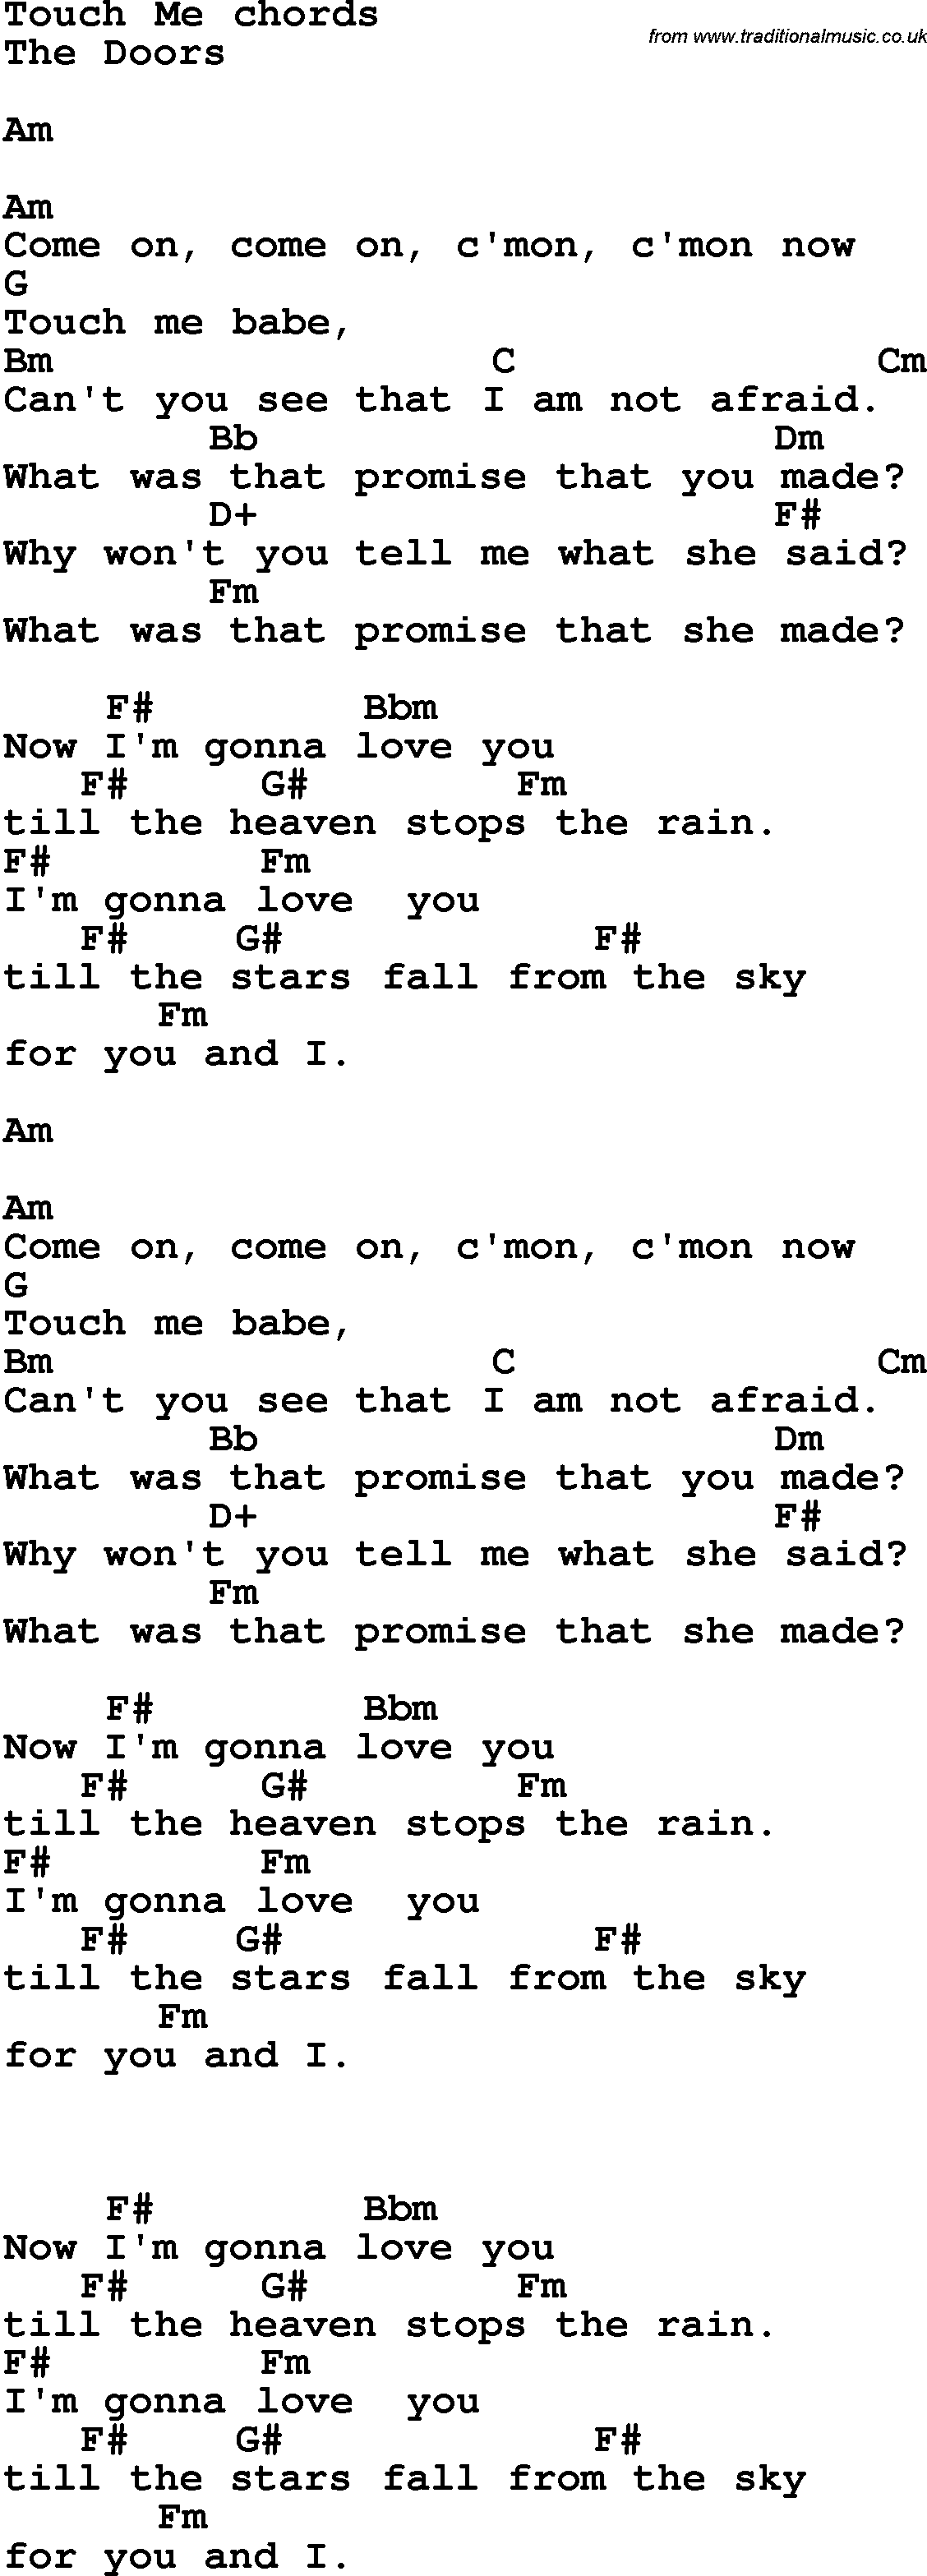 Song Lyrics with guitar chords for Touch Me